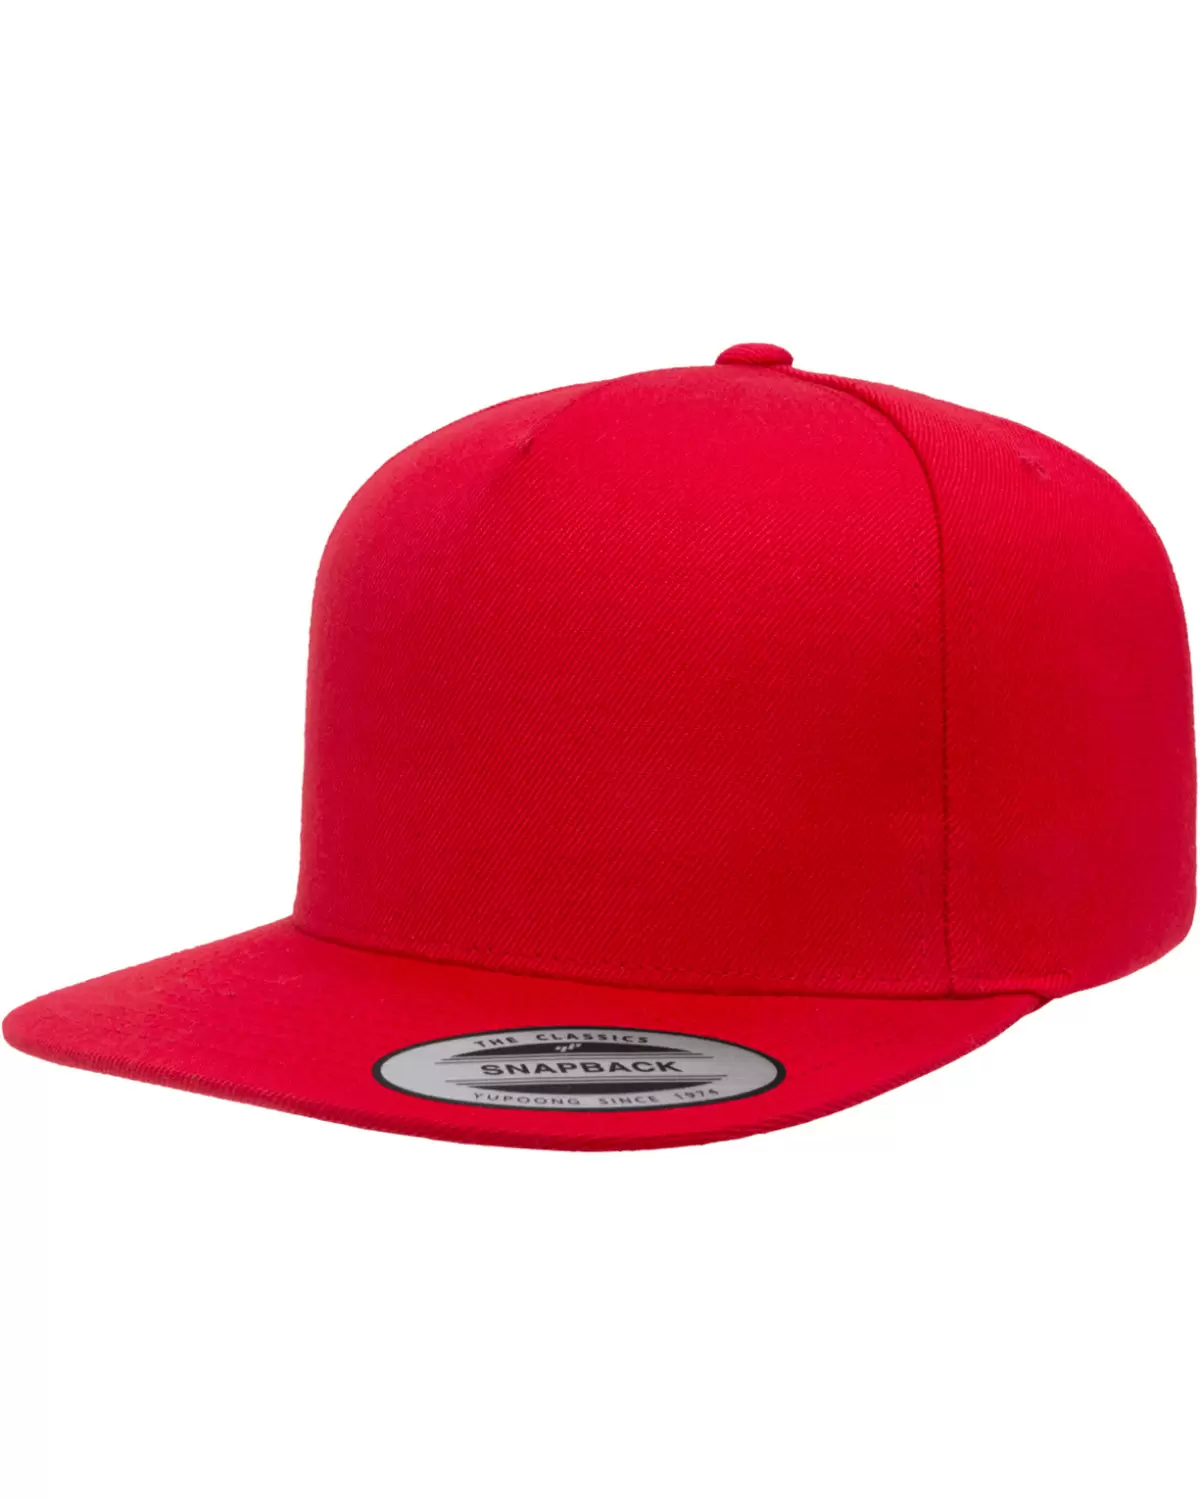 Yupoong 5089M Snapback Panel Wool Blend - Five From